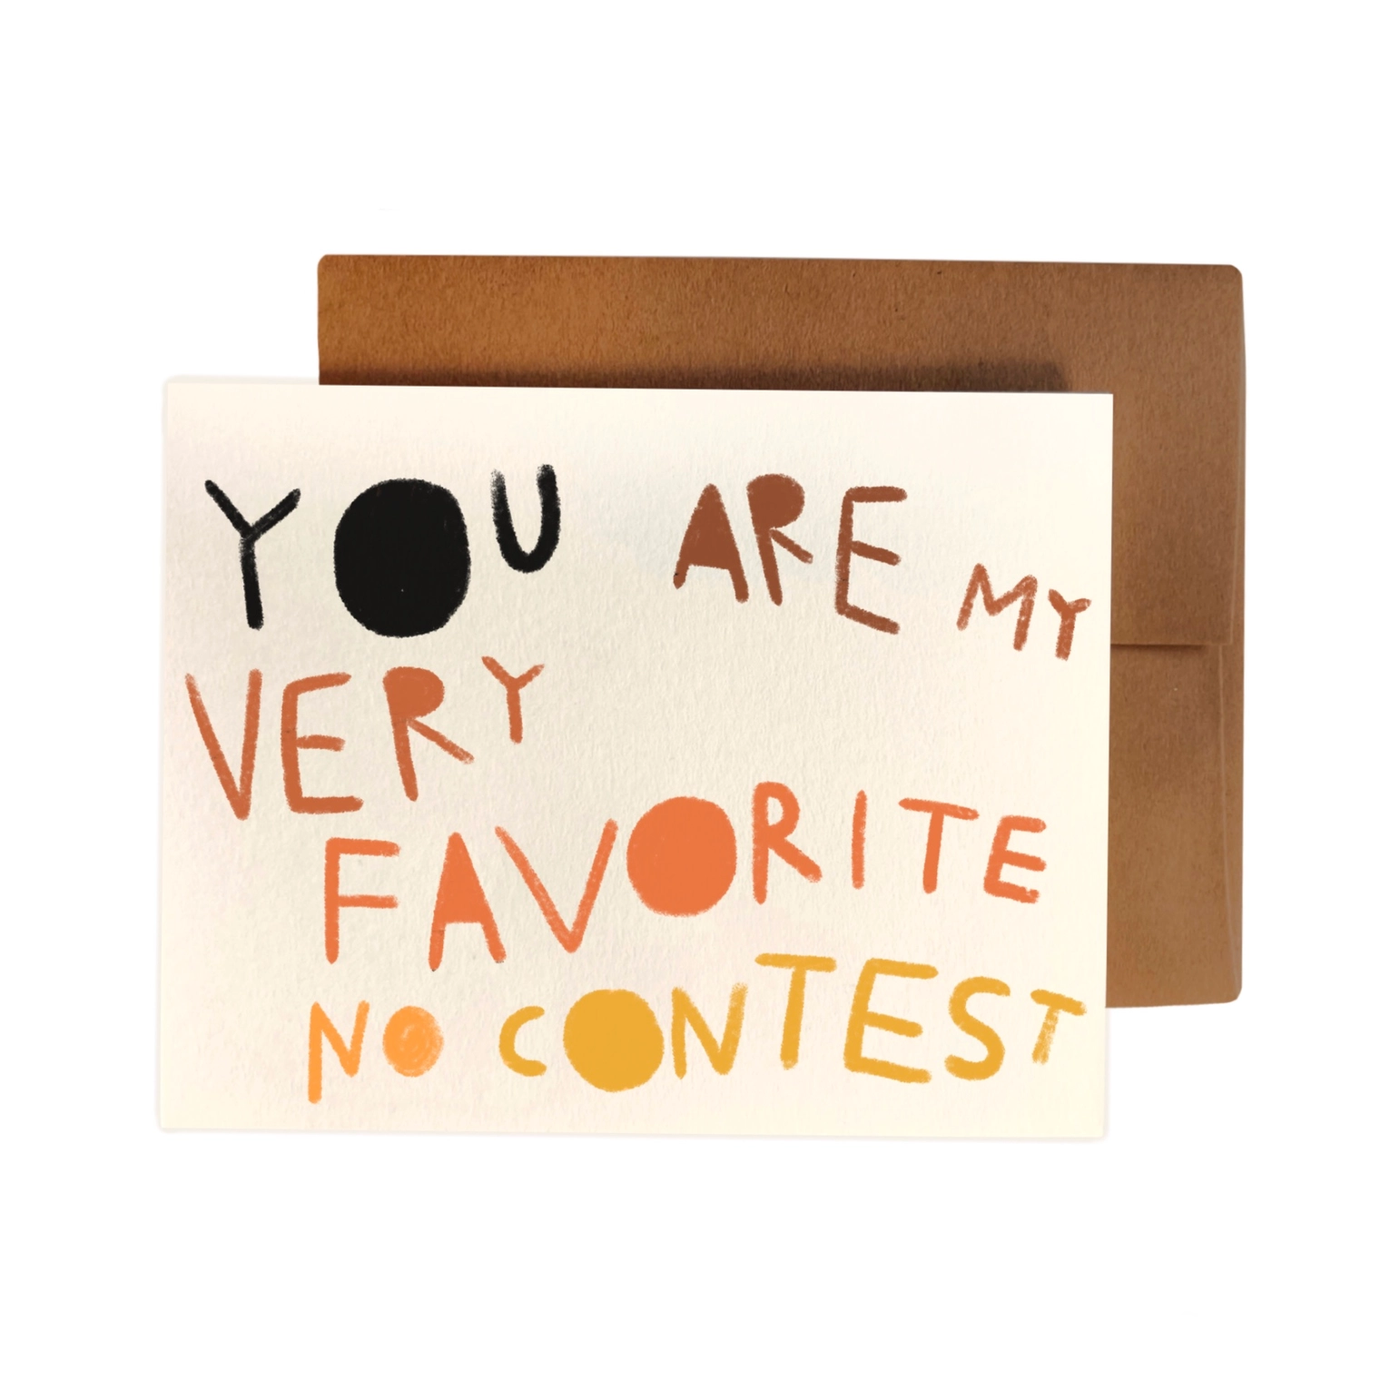 You Are My Very Favorite No Contest Greeting Card